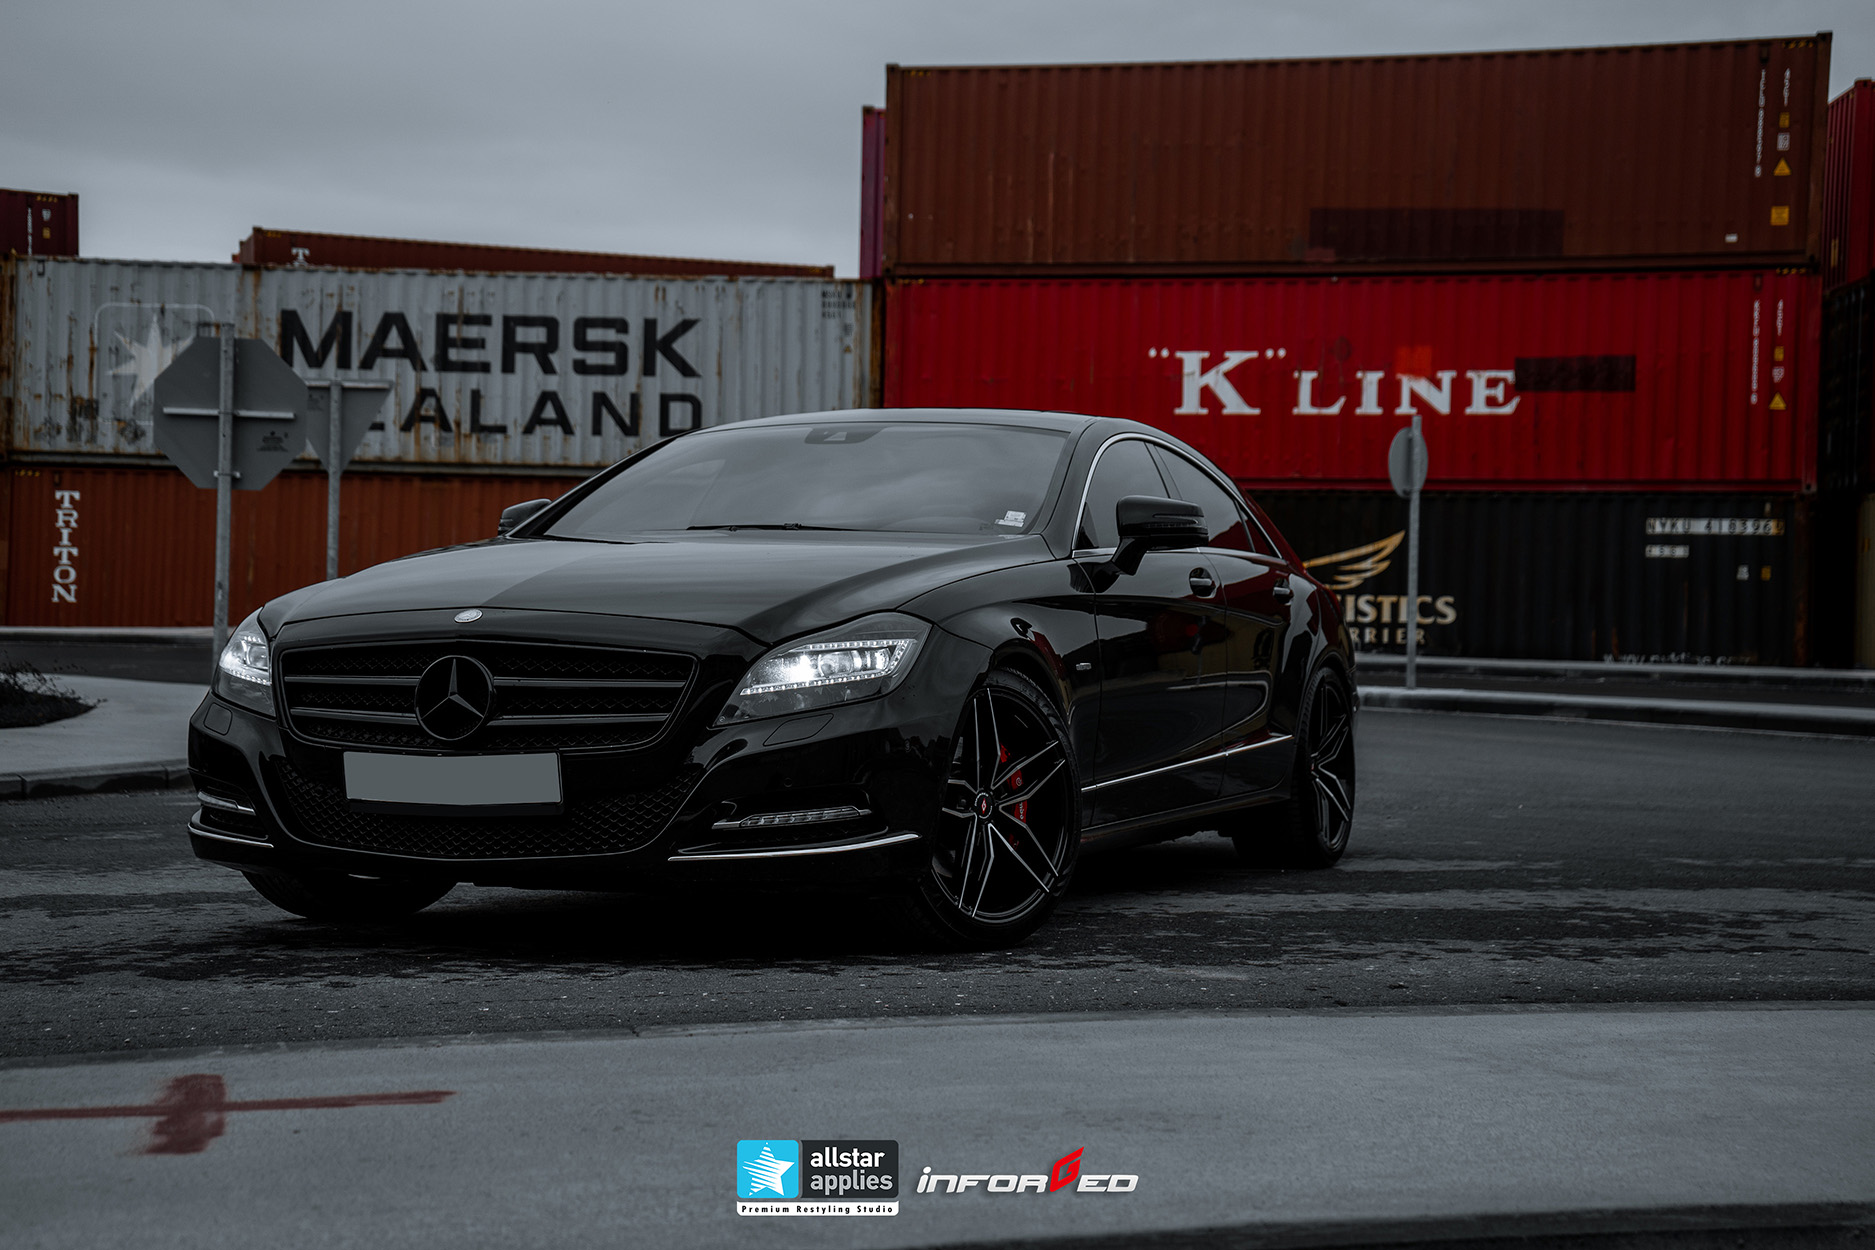 MERCEDES-BENZ CLS INFORGED IFG37 site 1